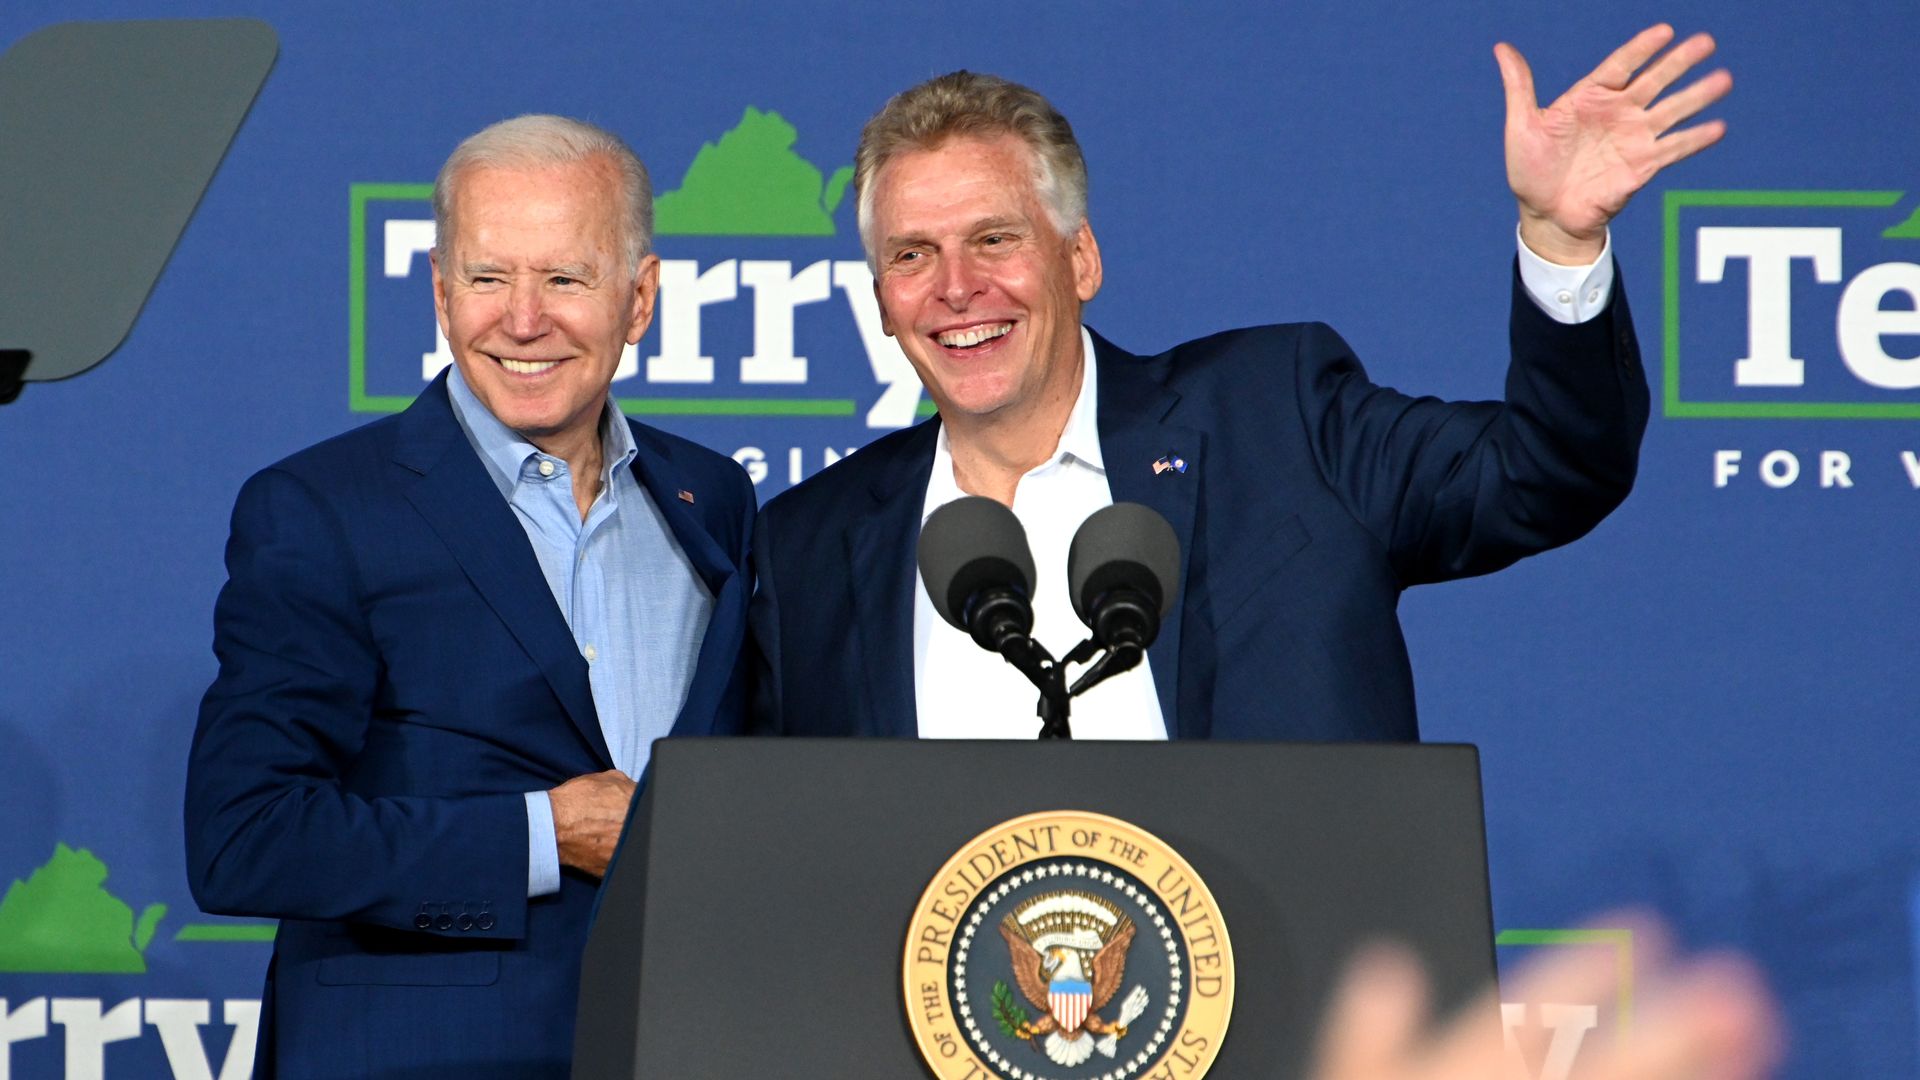 President Biden is seen campaigning with Democrat Terry McAuliffe in July.